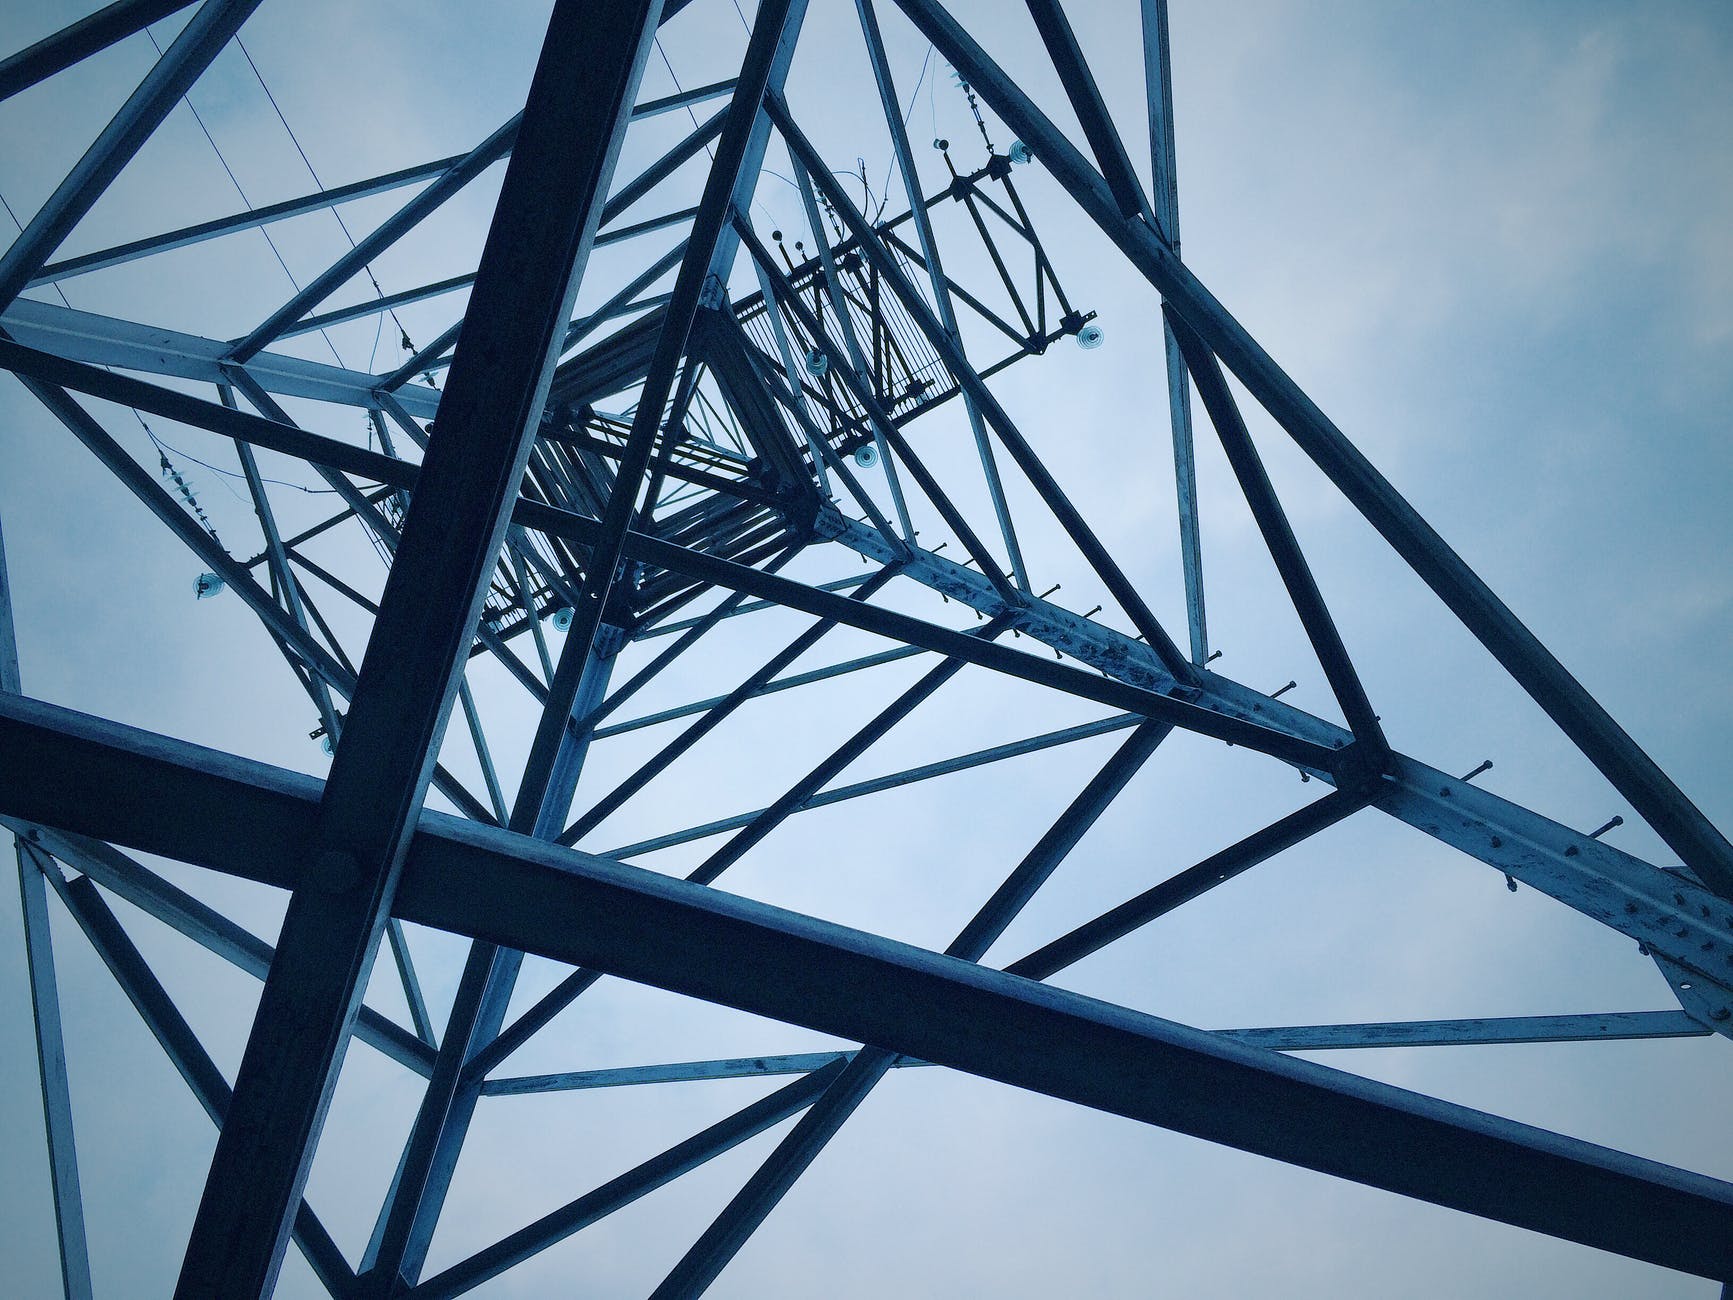 low angle view of electricity pylon against sky